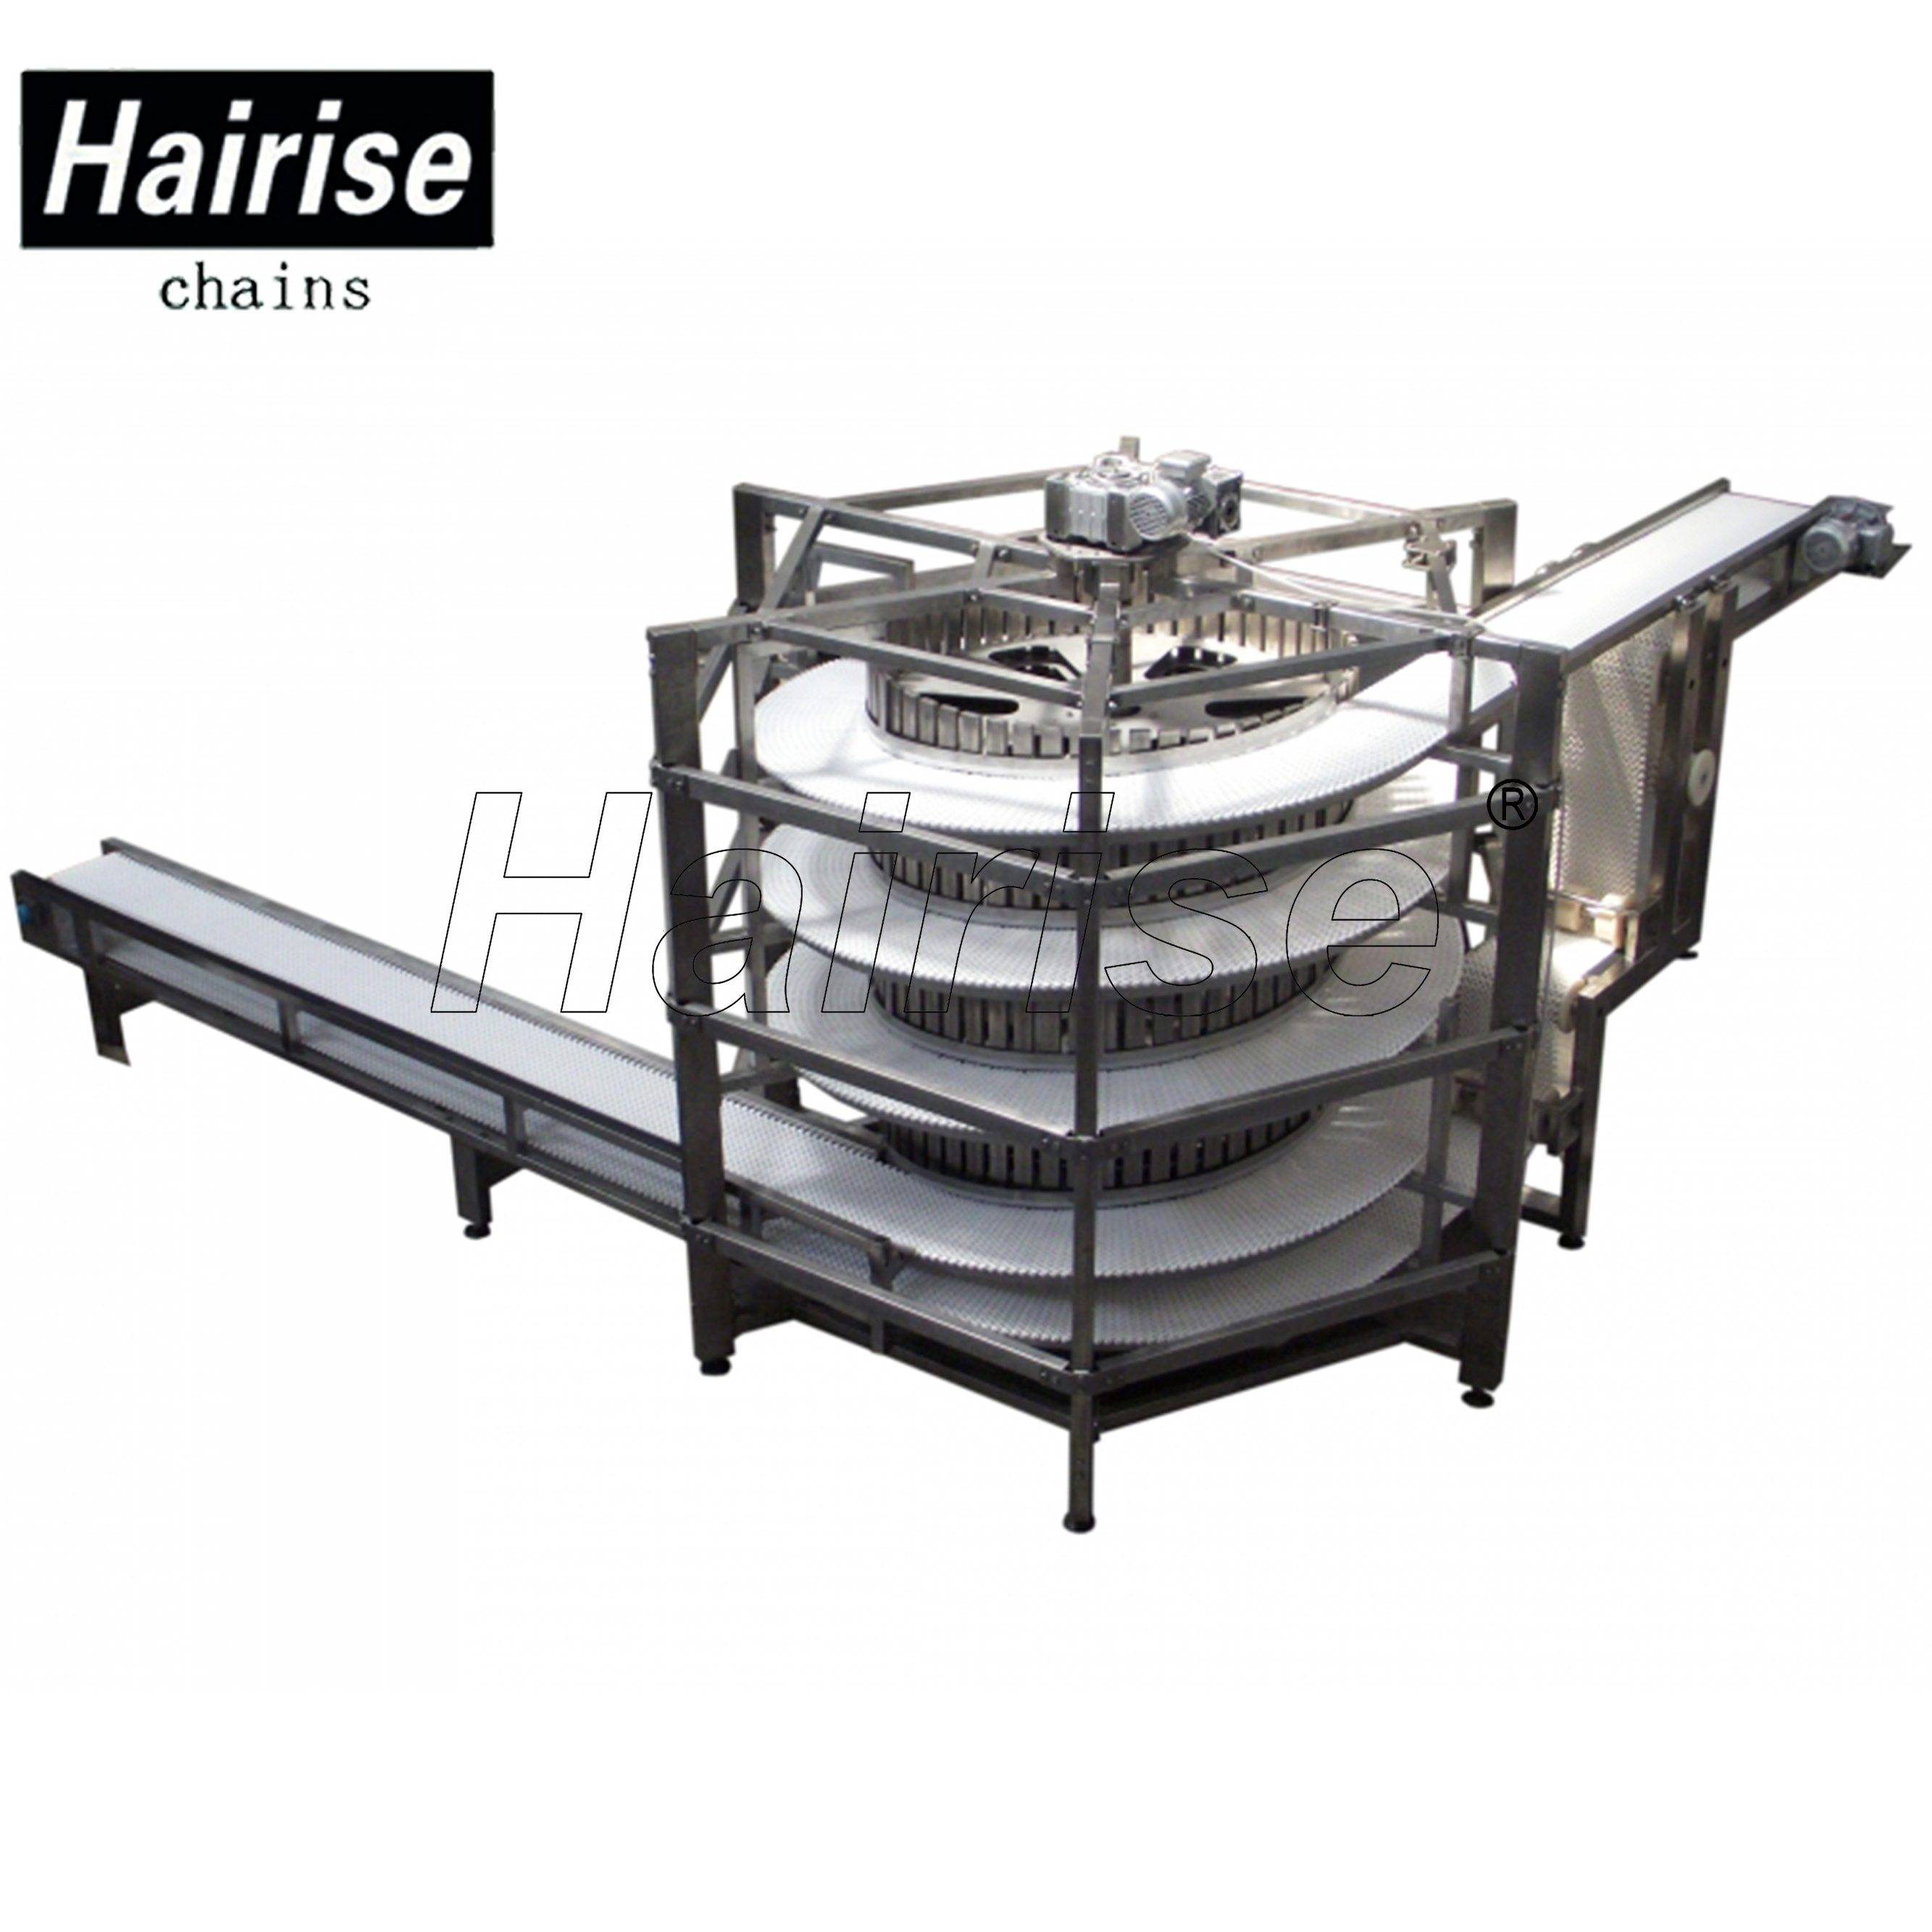 Hairise screw cooling conveyors with flush grid type belts